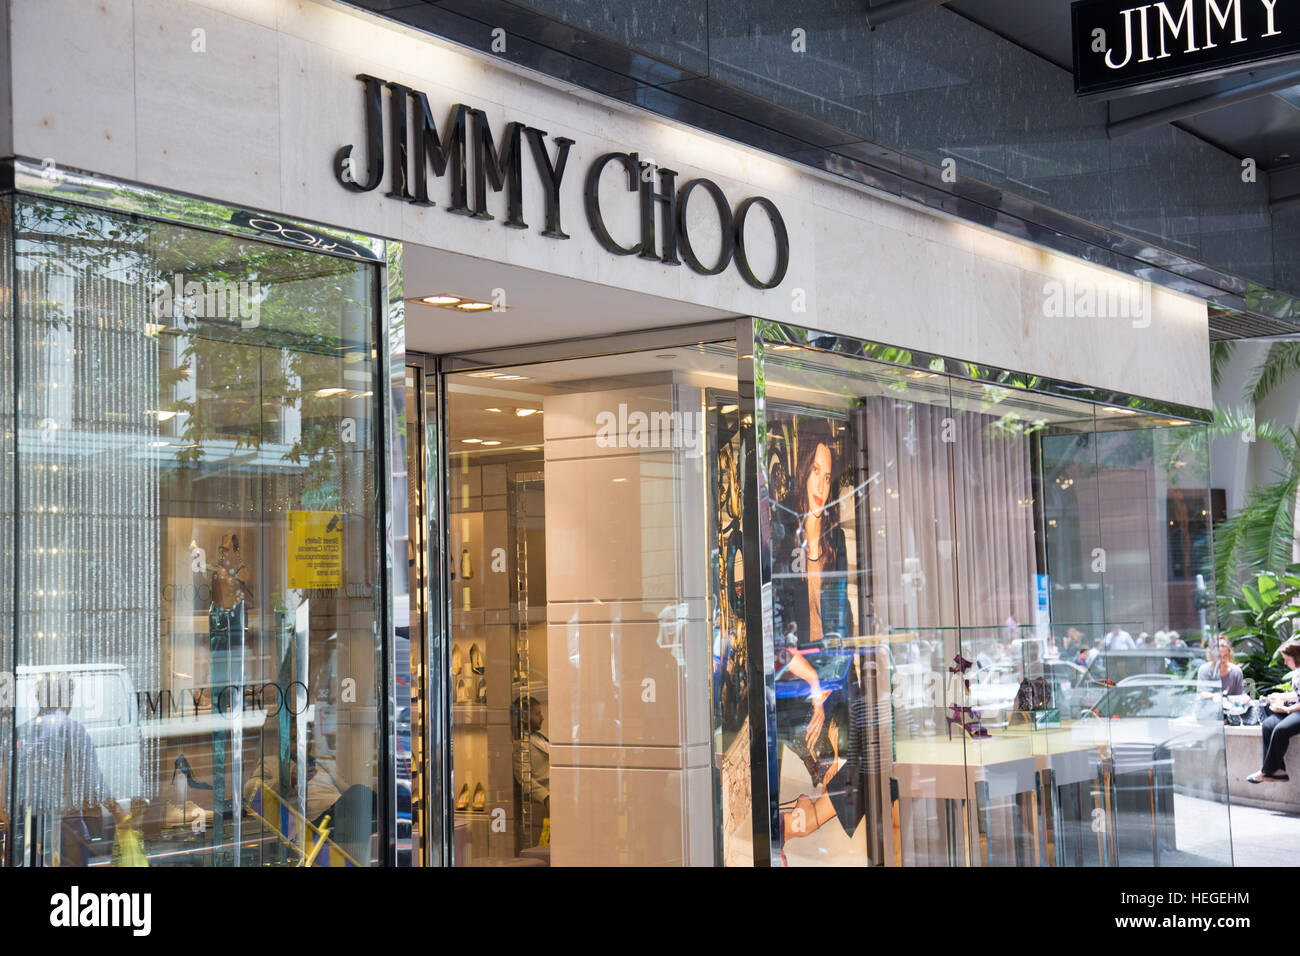 Jimmy Choo, luxury british brand, store in Sydney city centre,Australia selling womens goods and shoes Stock Photo